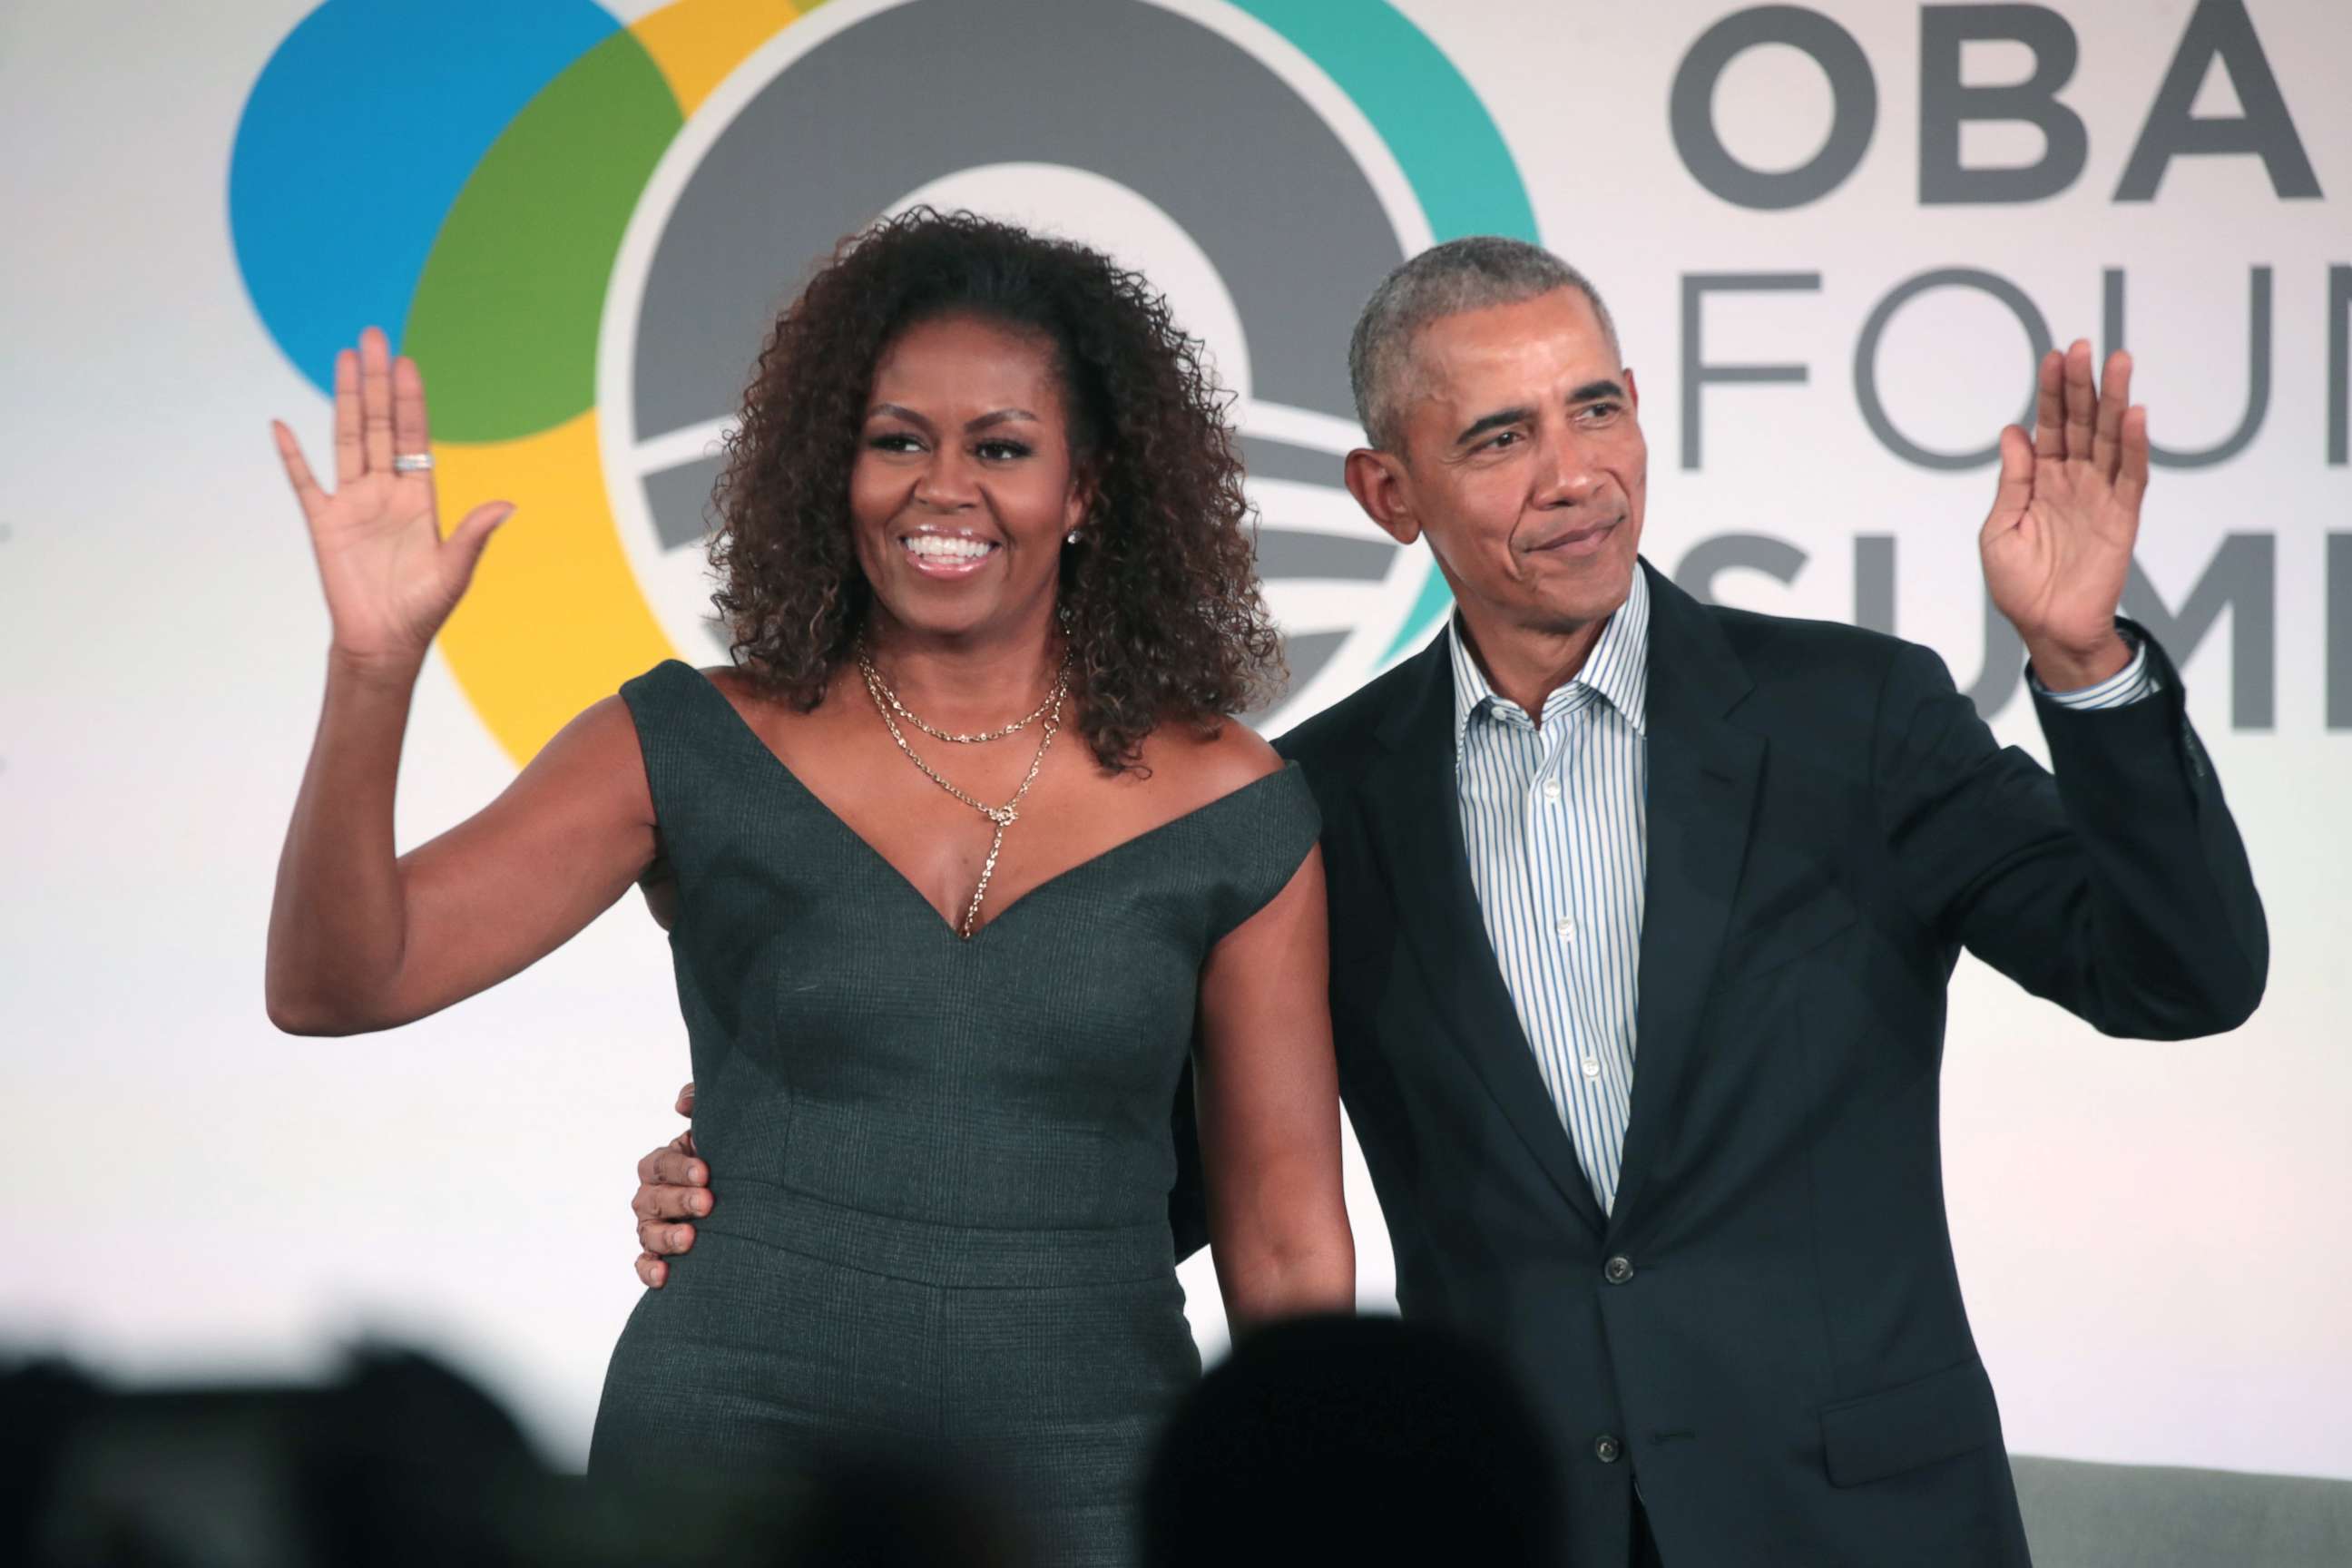 PHOTO: Former President Barack Obama and his wife Michelle close the Obama Foundation Summit together on the campus of the Illinois Institute of Technology, Oct. 29, 2019, in Chicago.